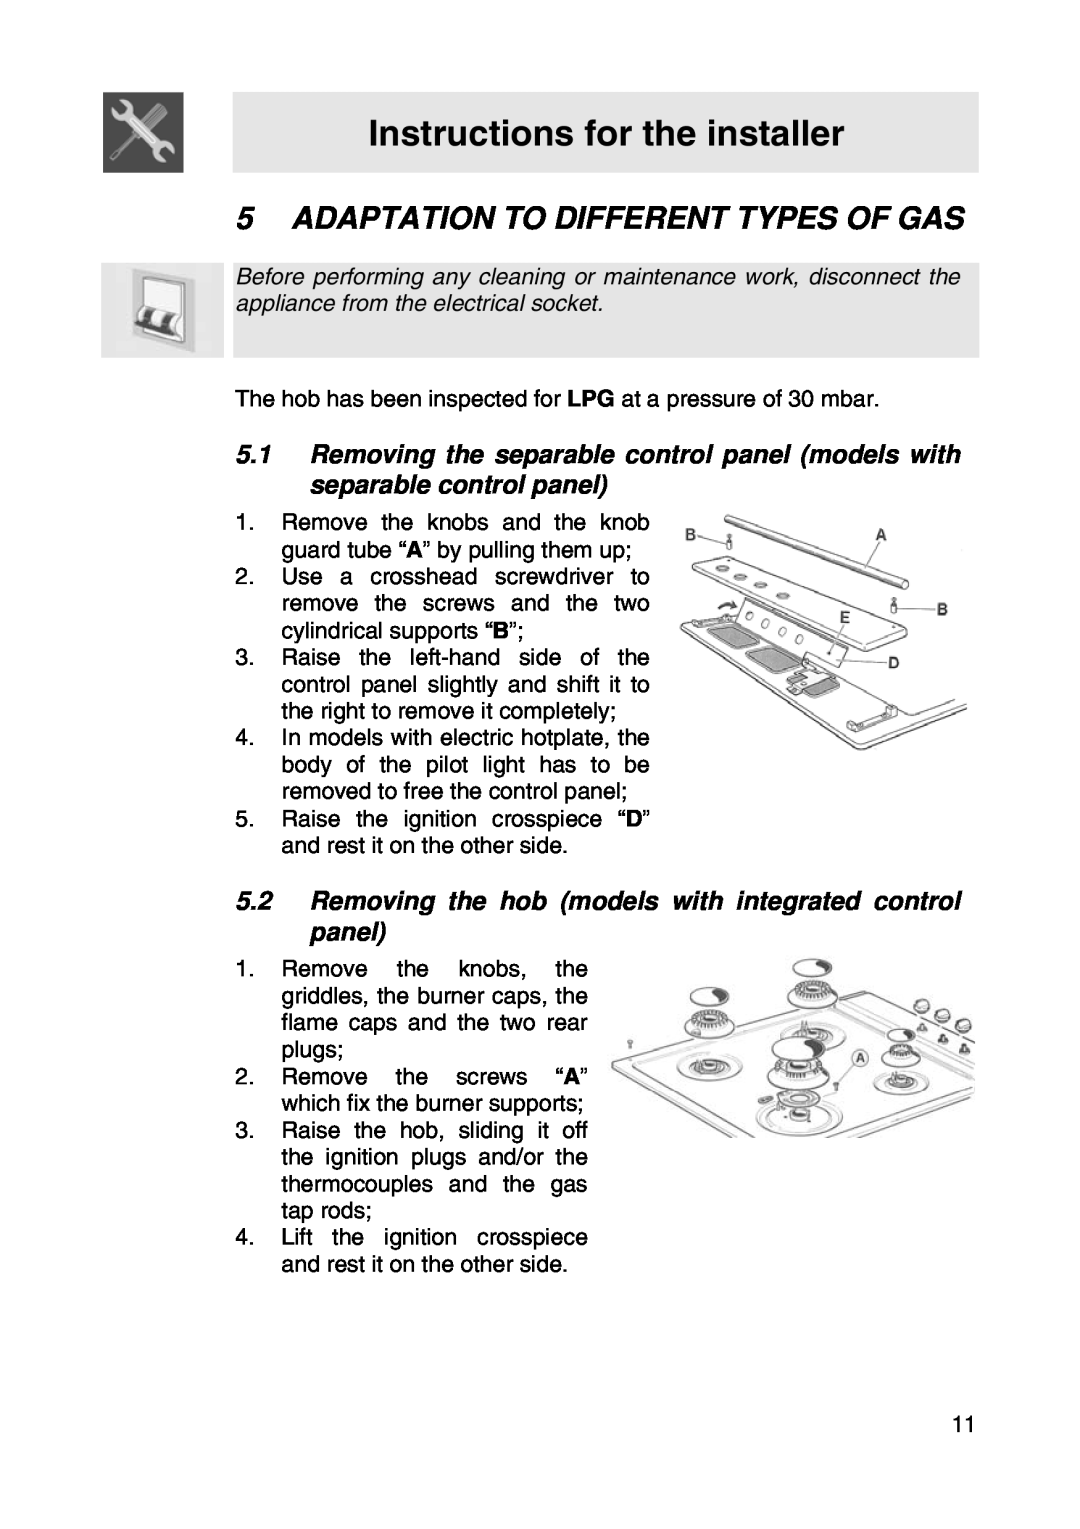 Smeg SER63LPG manual Adaptation To Different Types Of Gas, Instructions for the installer 